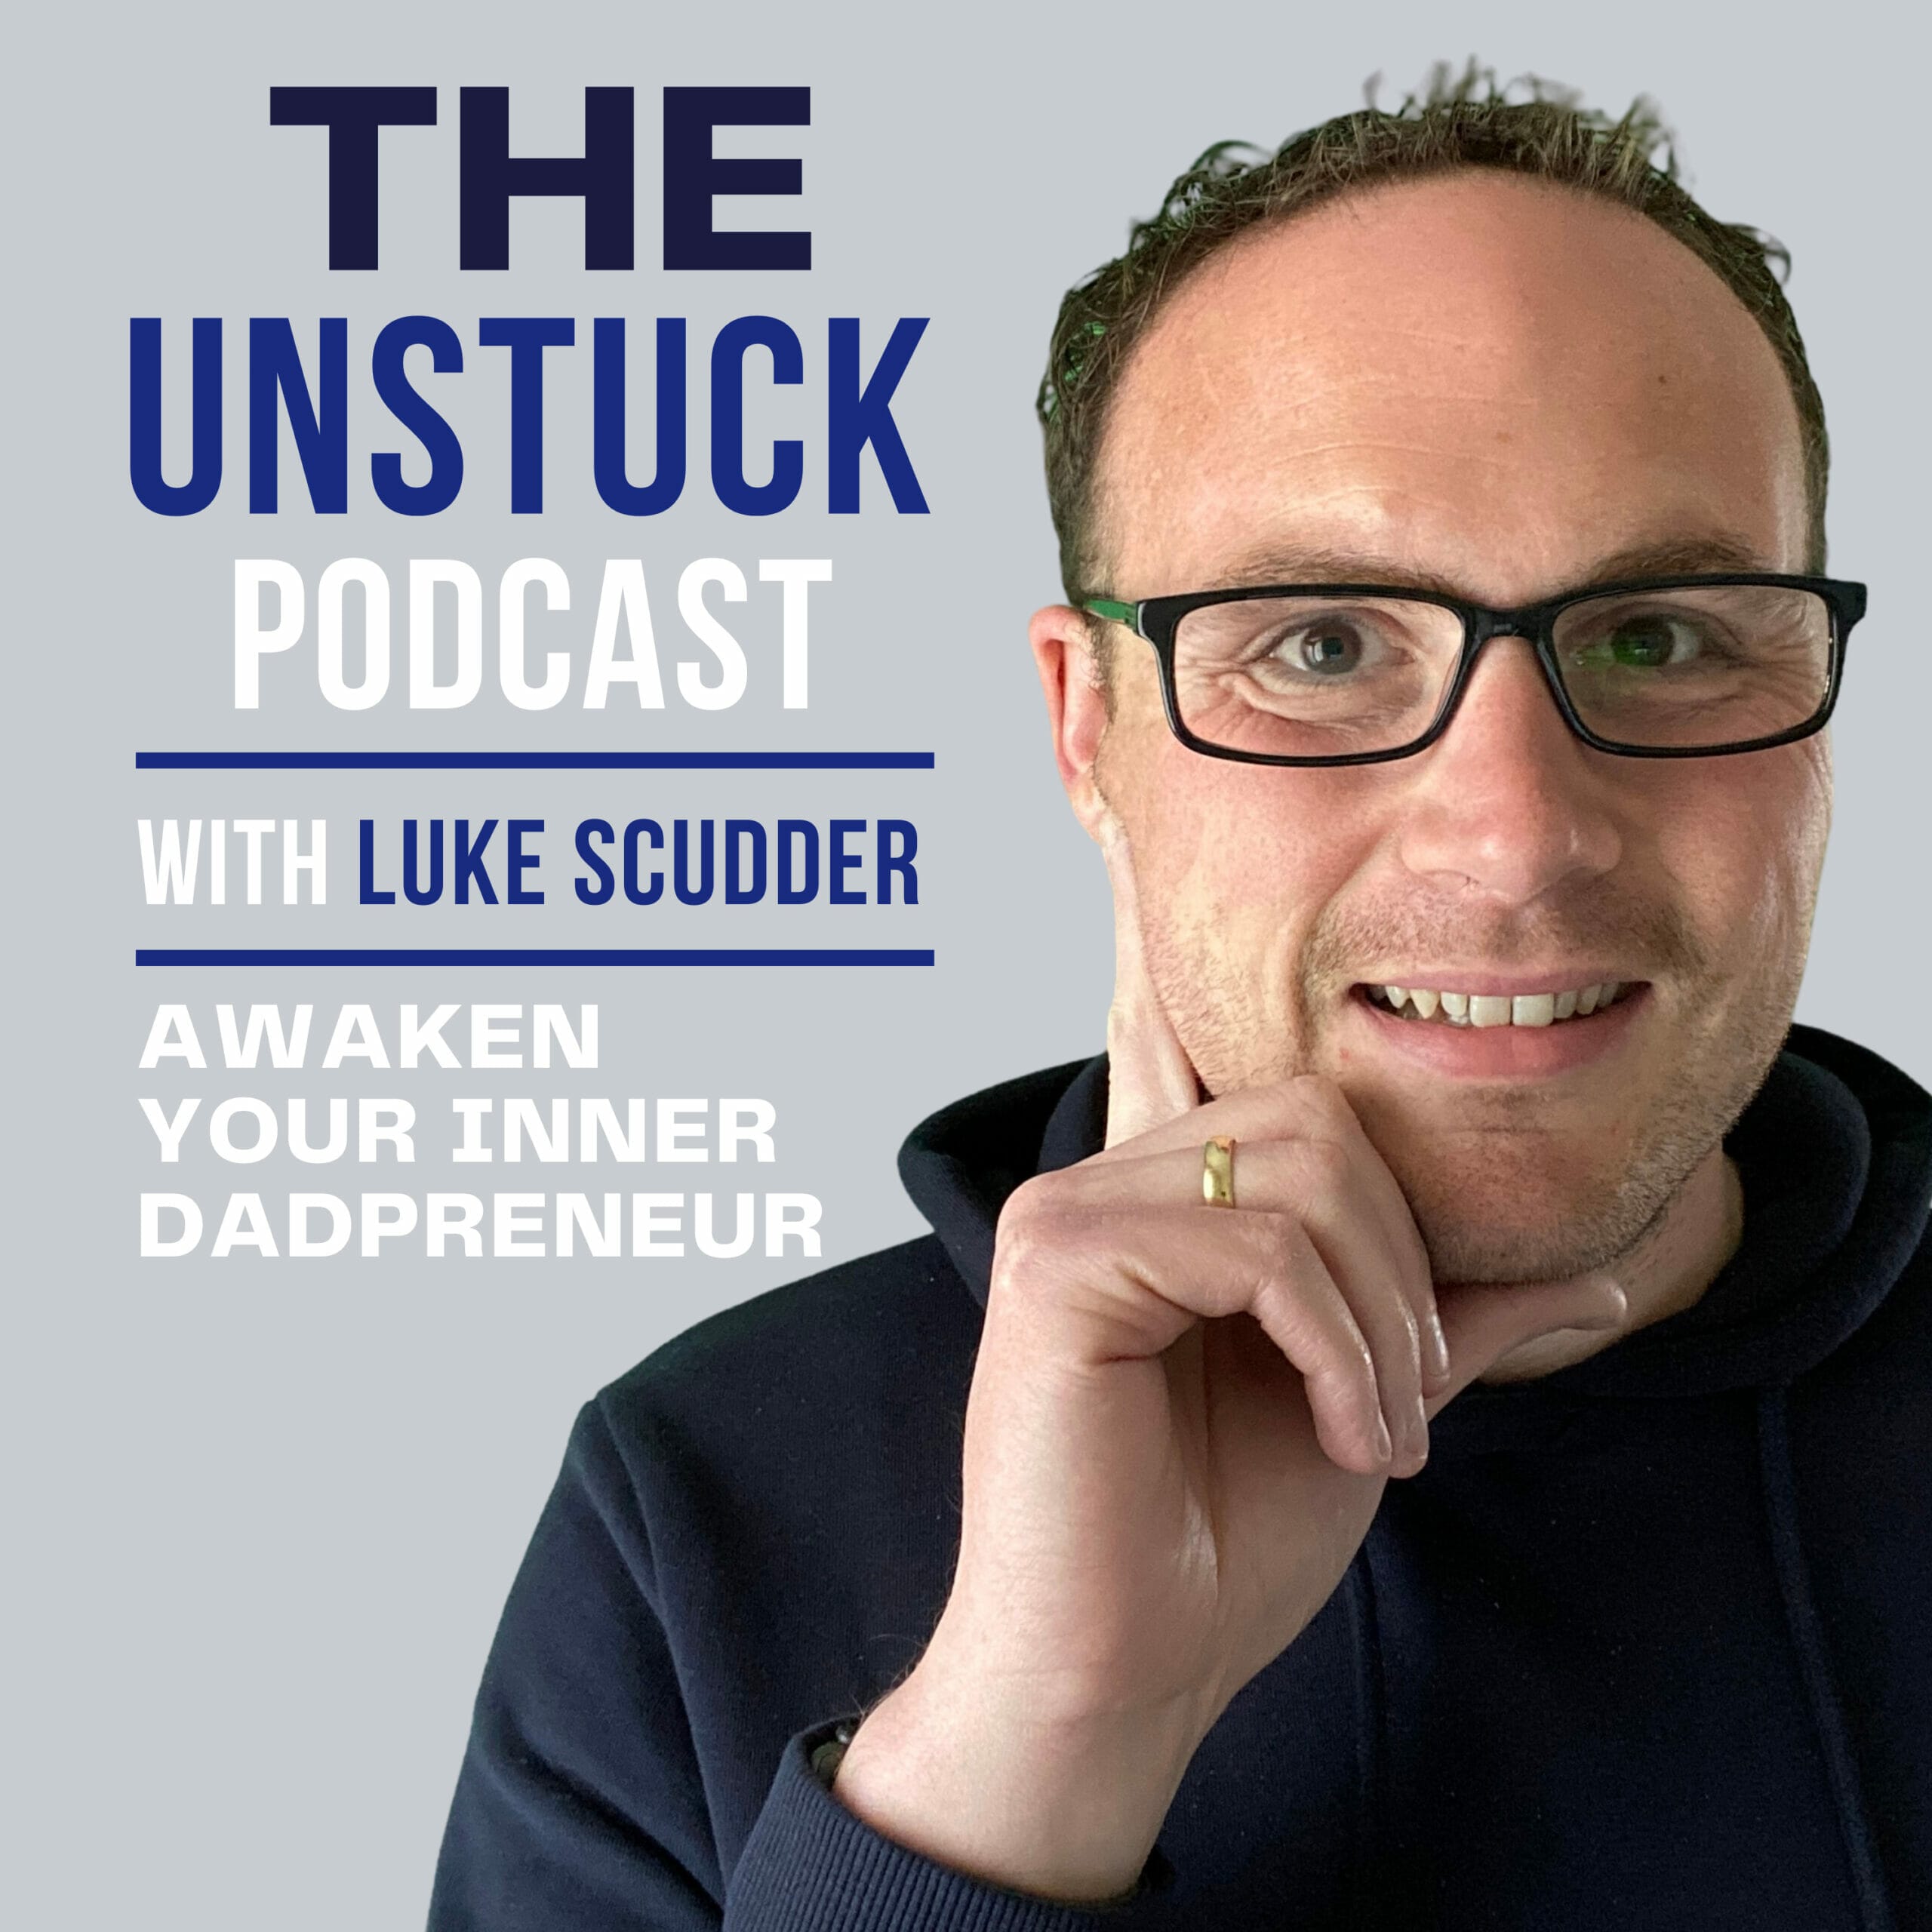 The Unstuck Podcast with Luke Scudder